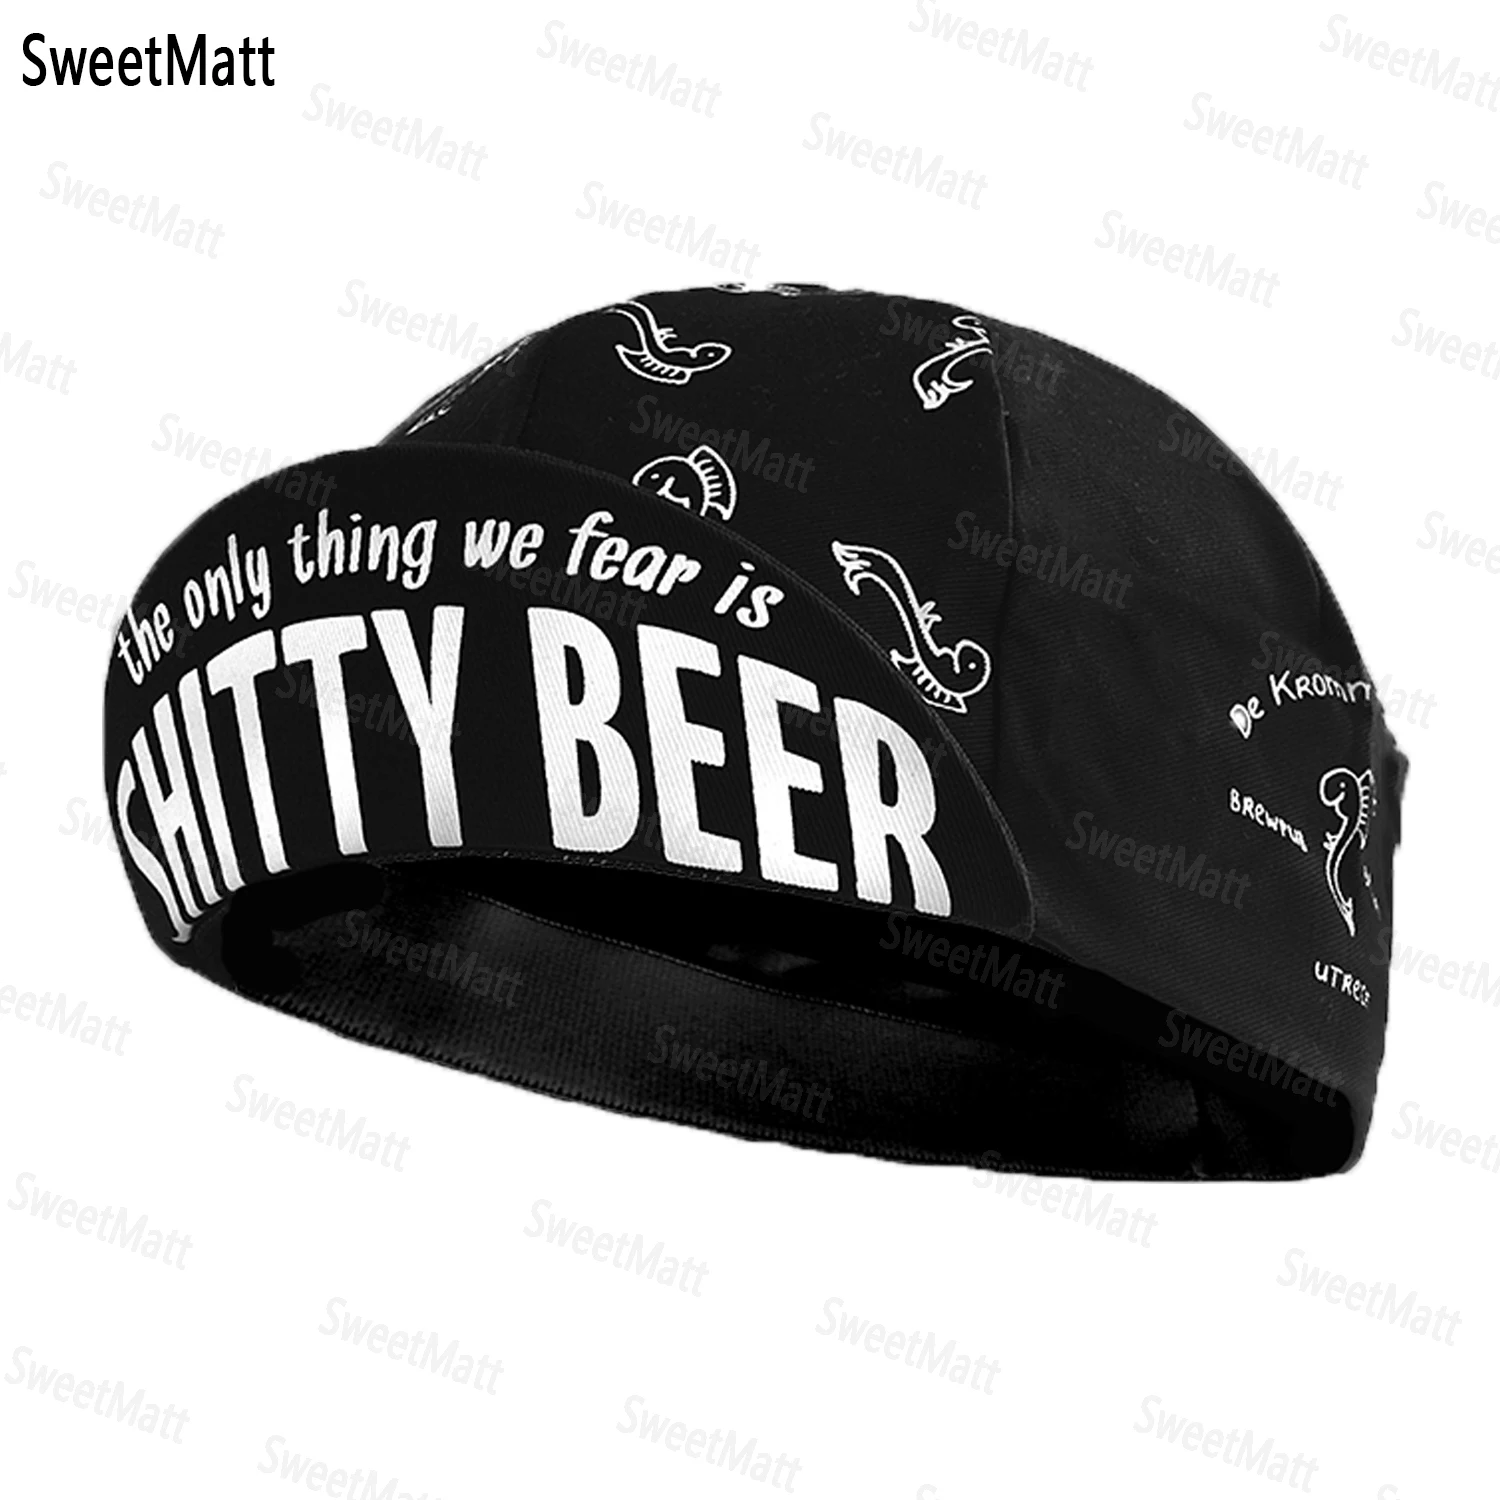 

SweetMatt Classic Shitty Beer Black Series Polyester Bicycle Men's Caps Summer Cool Sun Protection Quick Dry Cycling Balaclava